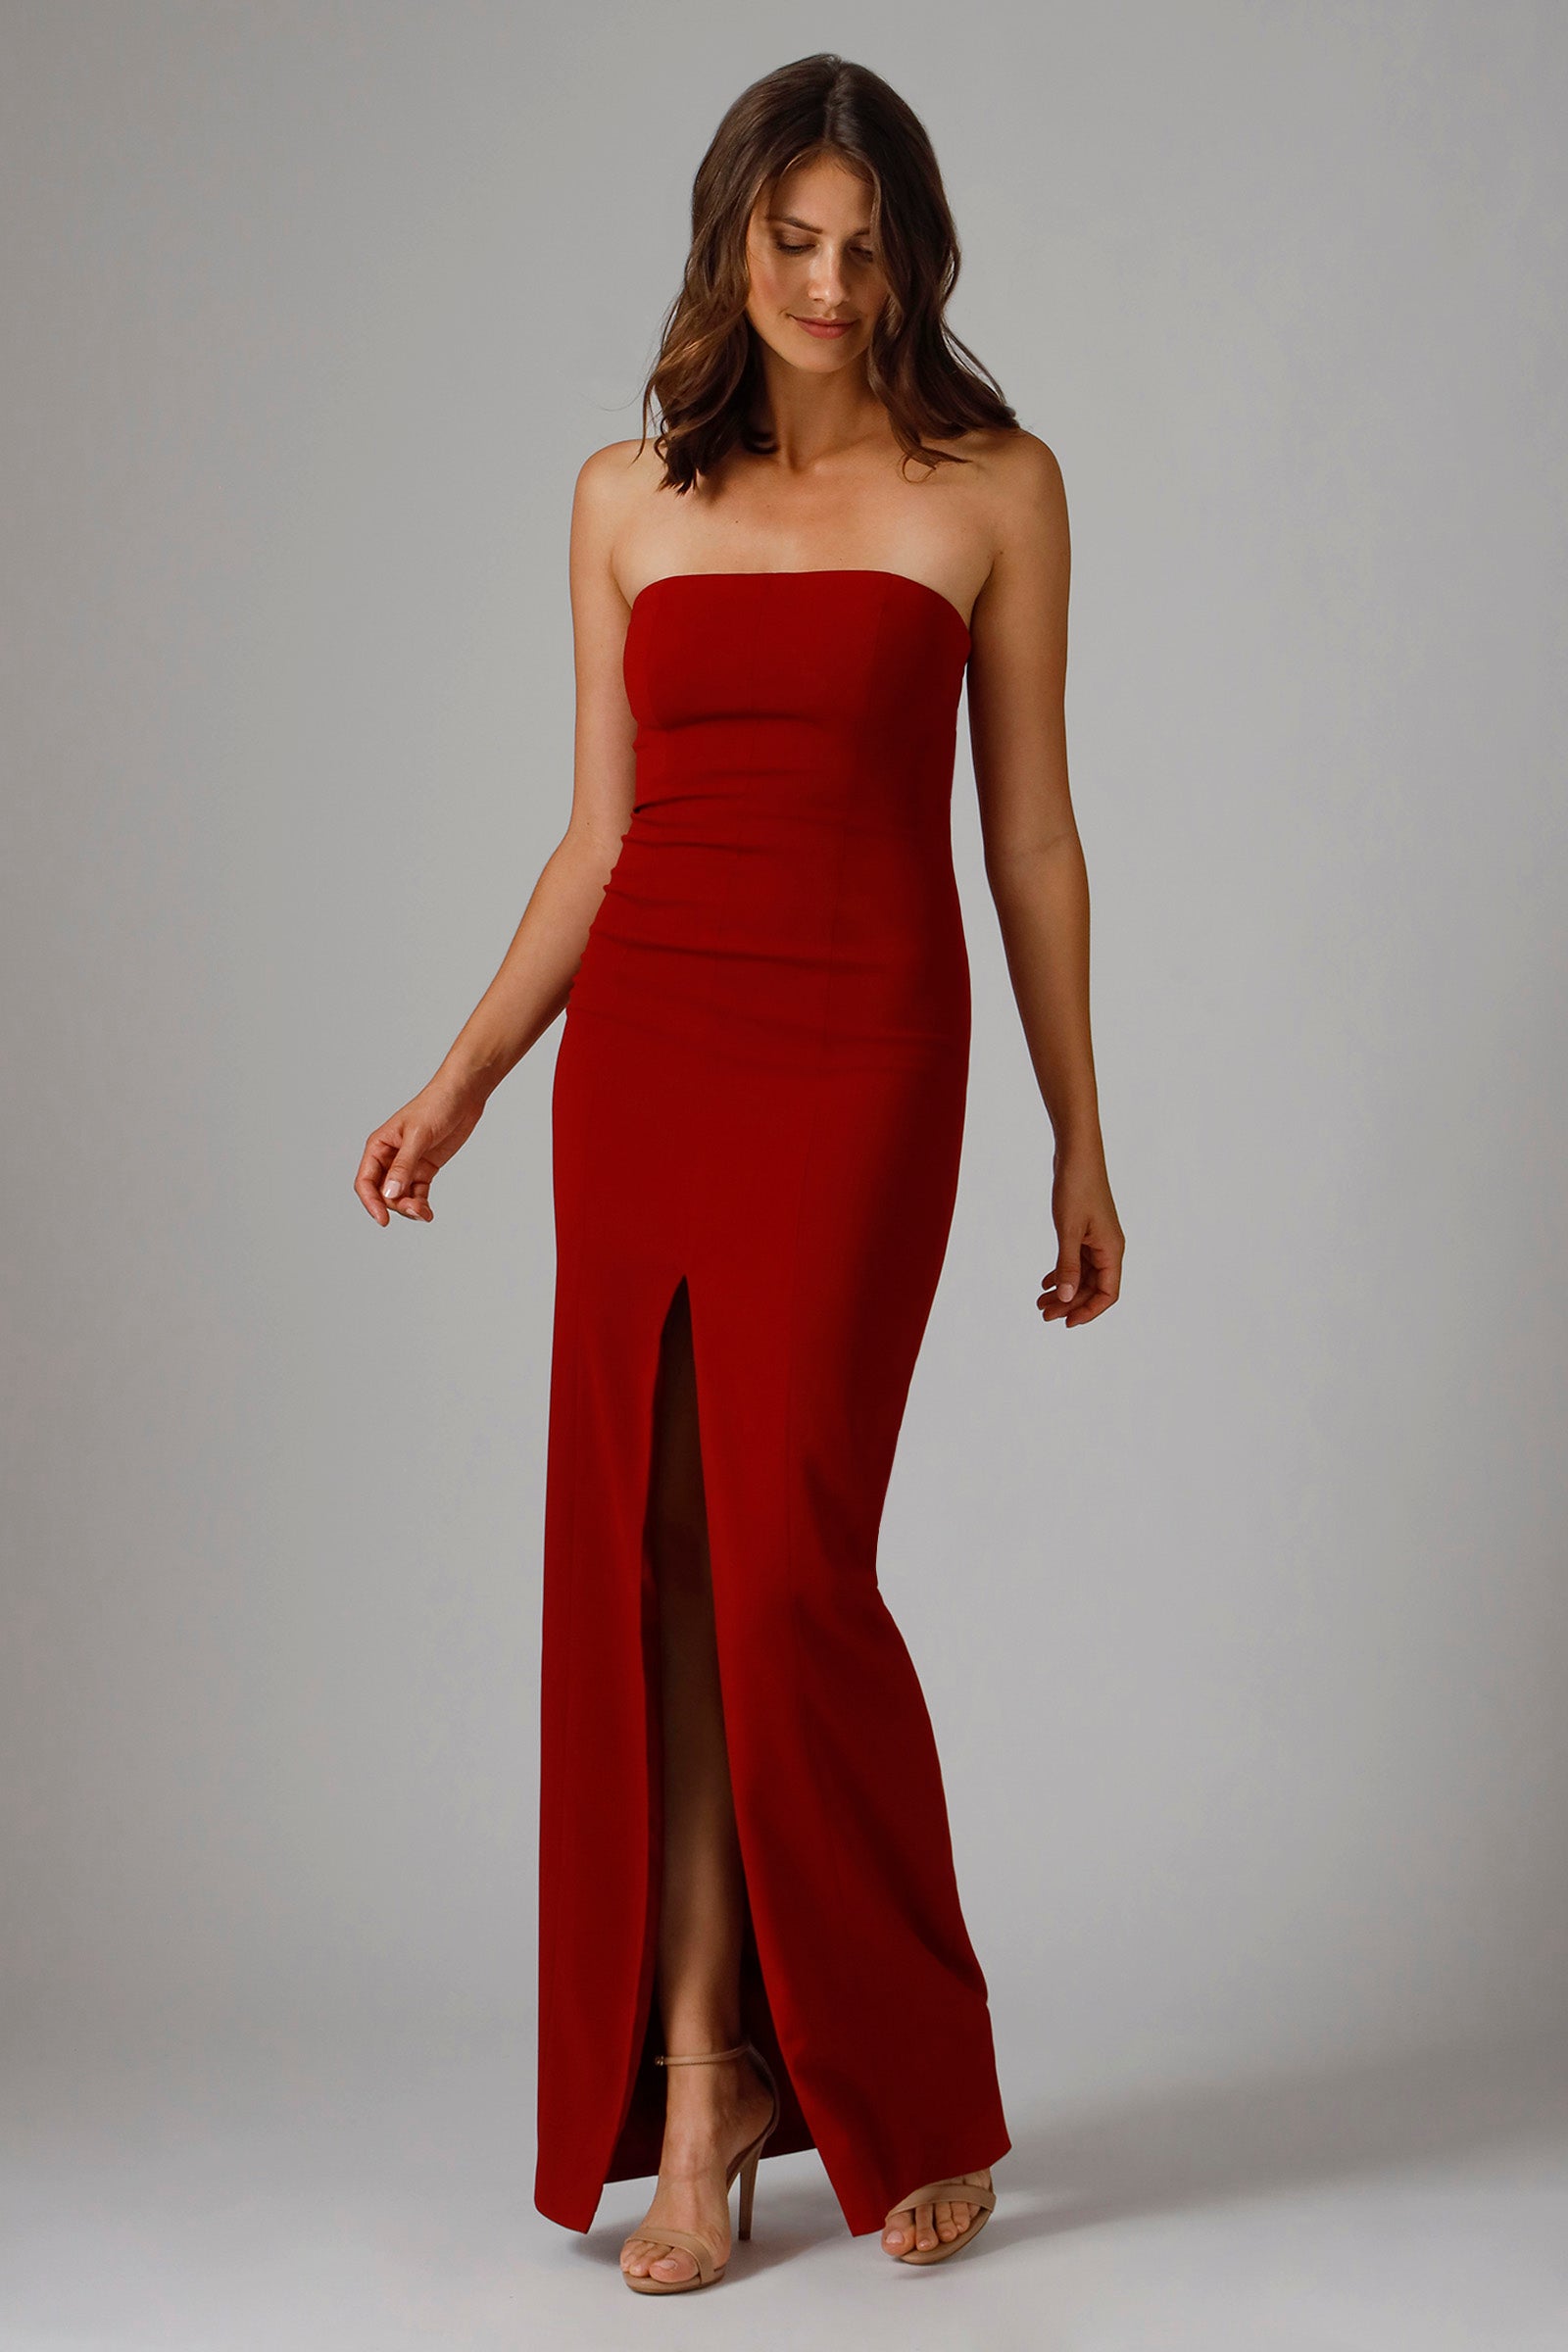 jay godfrey red gown